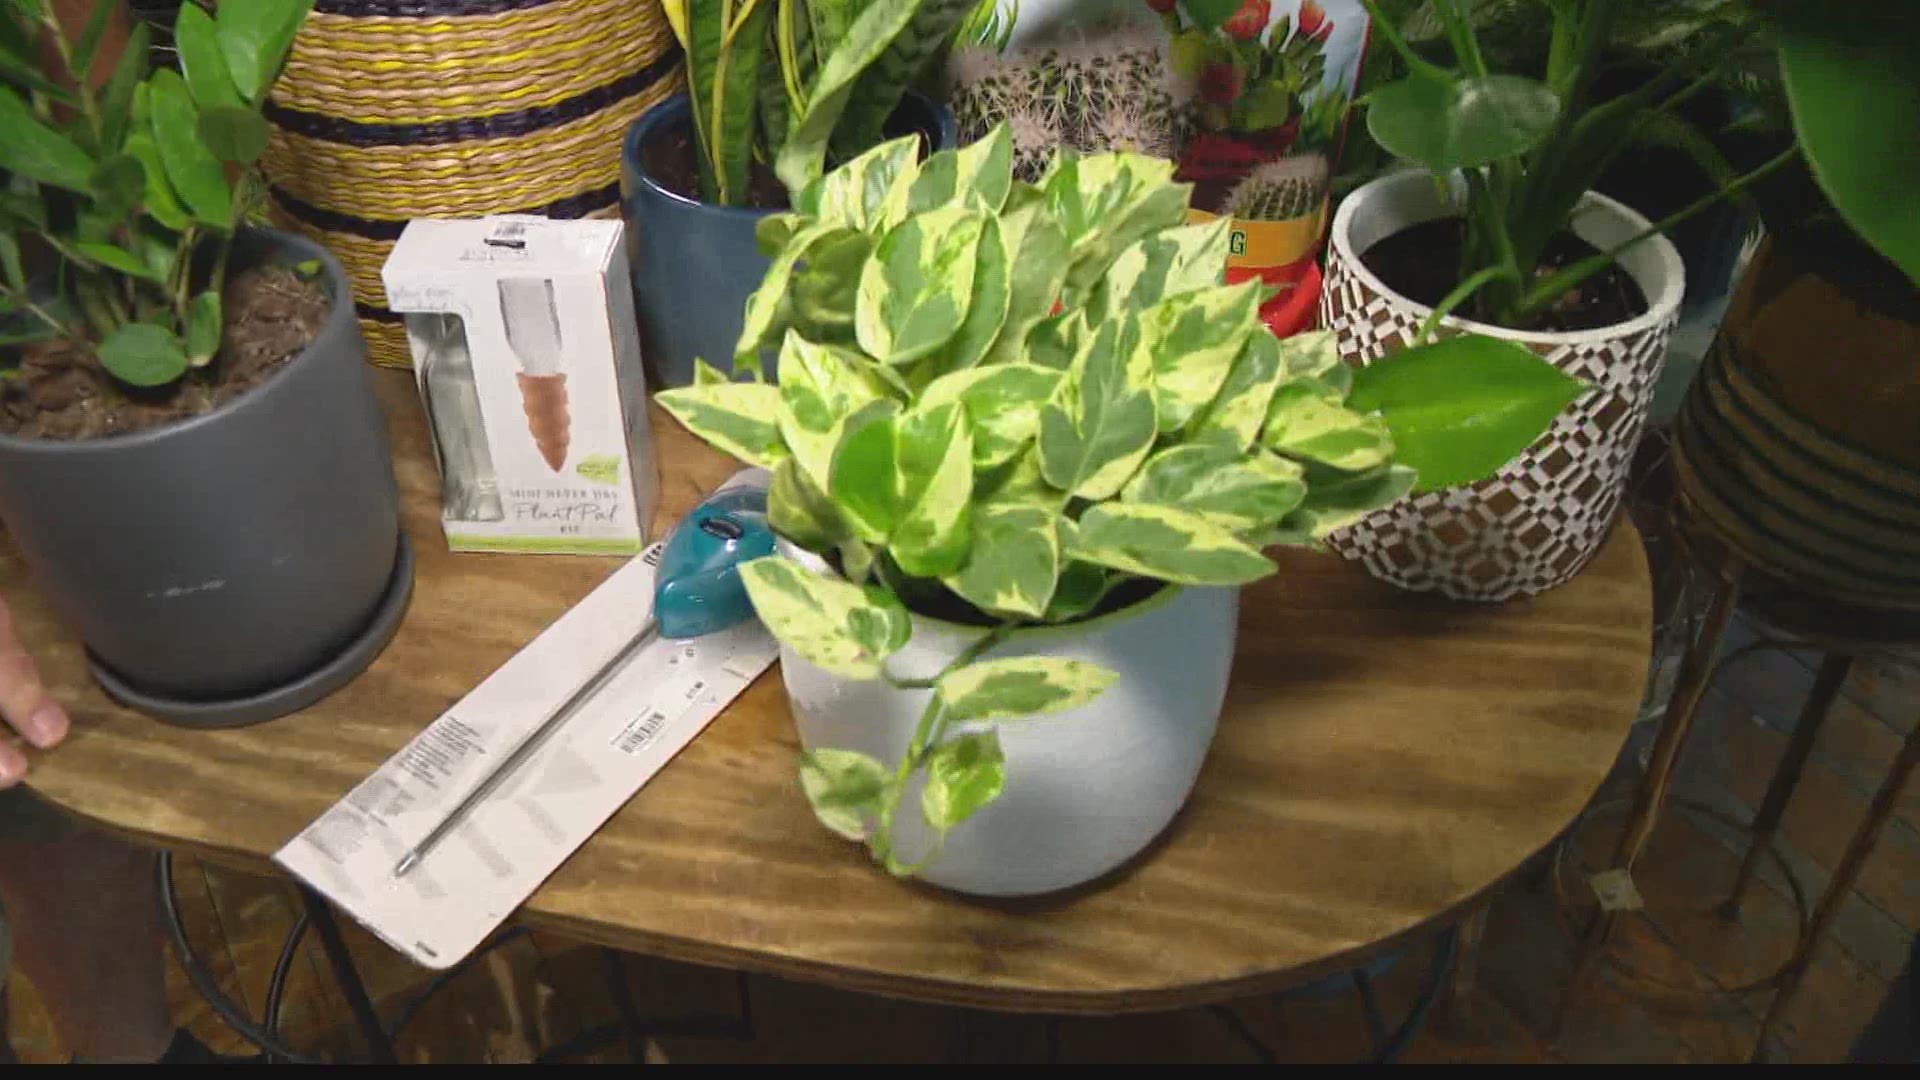 Pat shares advice on the care and feeding of indoor plants.